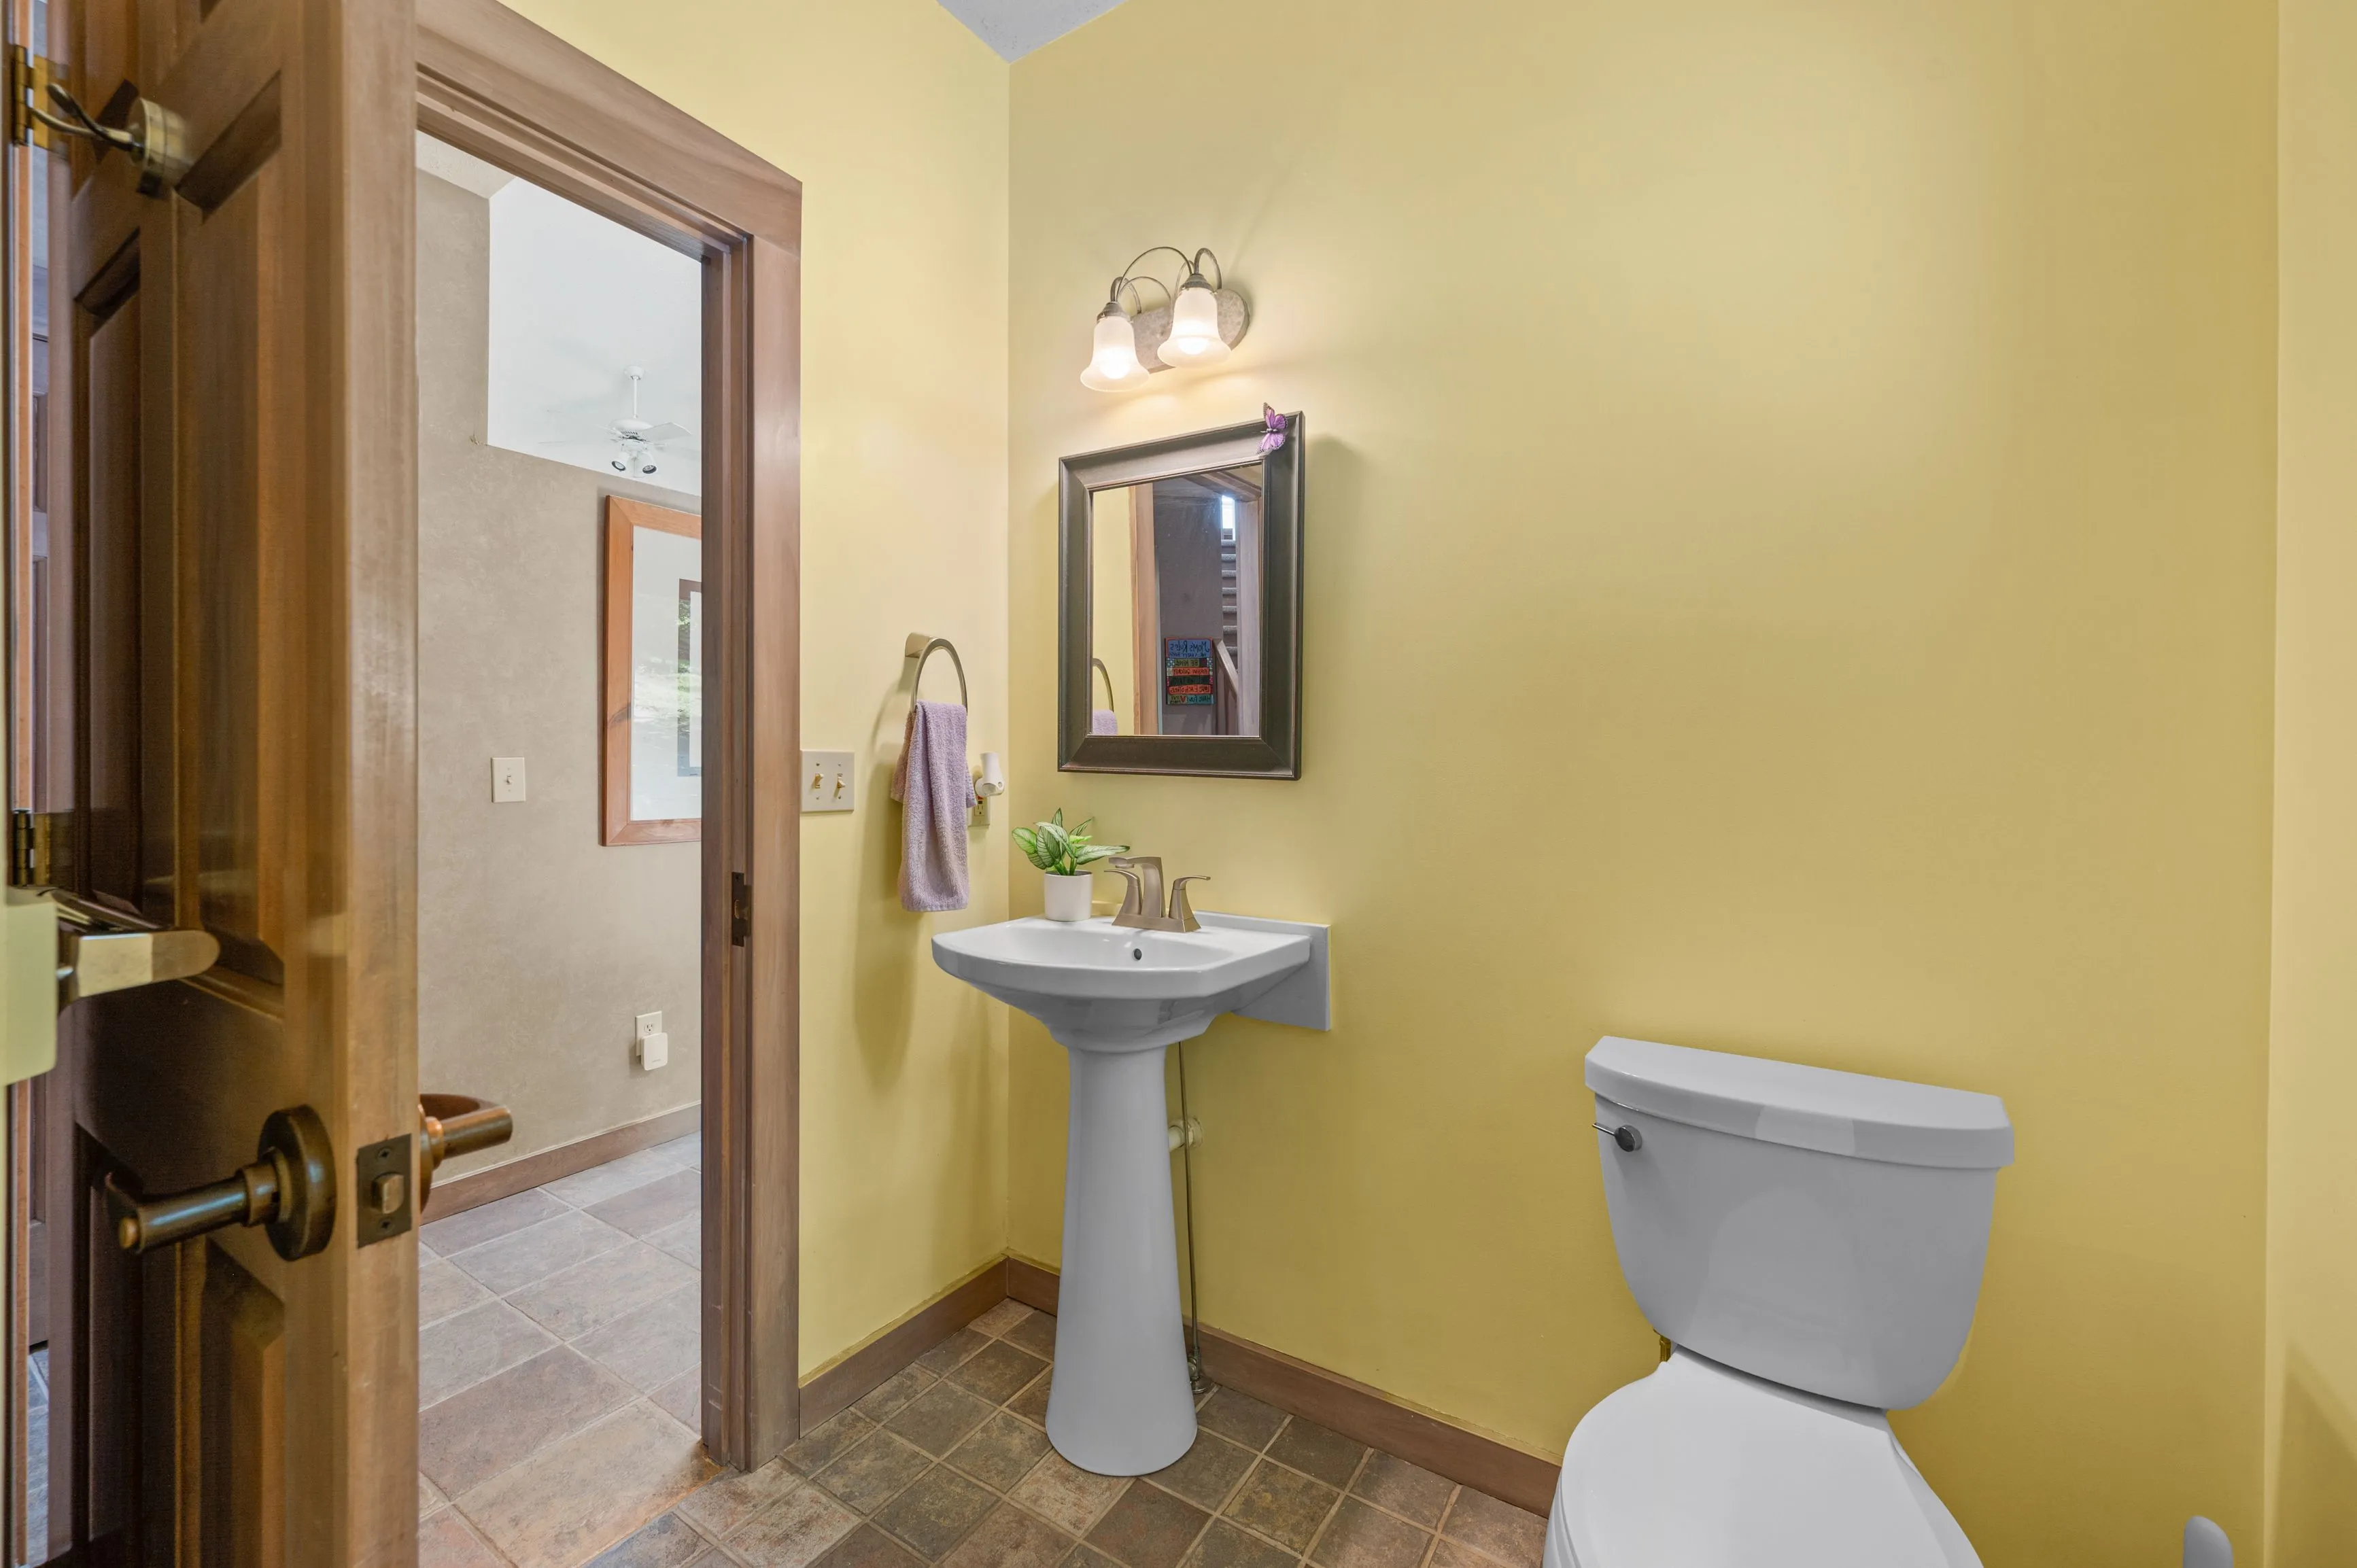 A small bathroom with yellow walls, featuring a pedestal sink, toilet, and a framed mirror with decorative lighting above it.